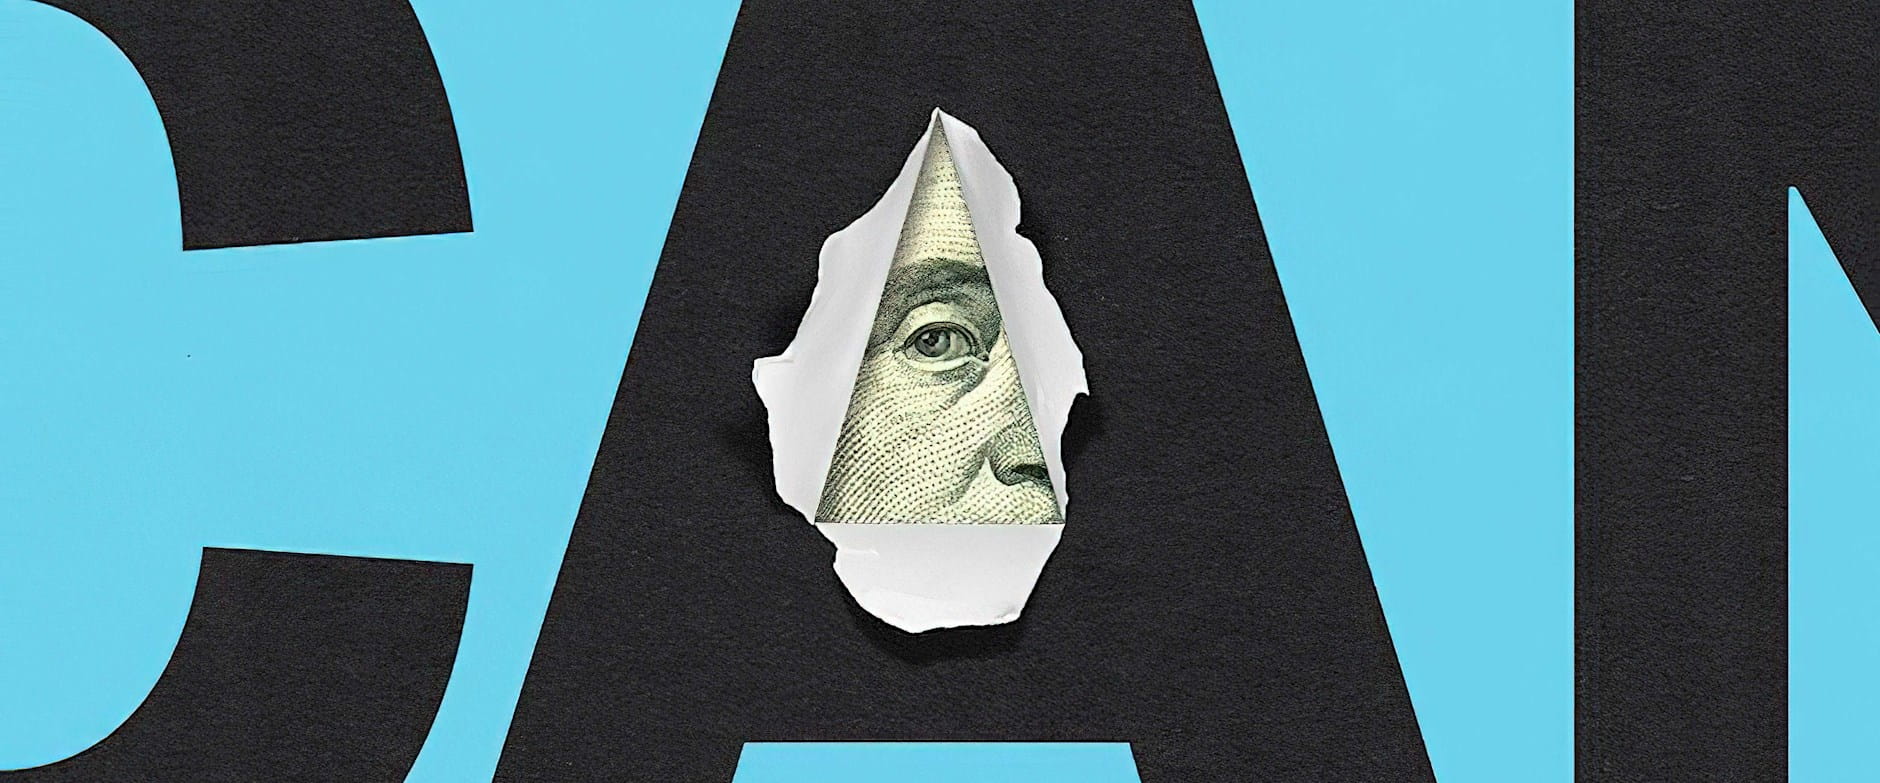 Part of a torn dollar bill in the middle of the A in the word CAN